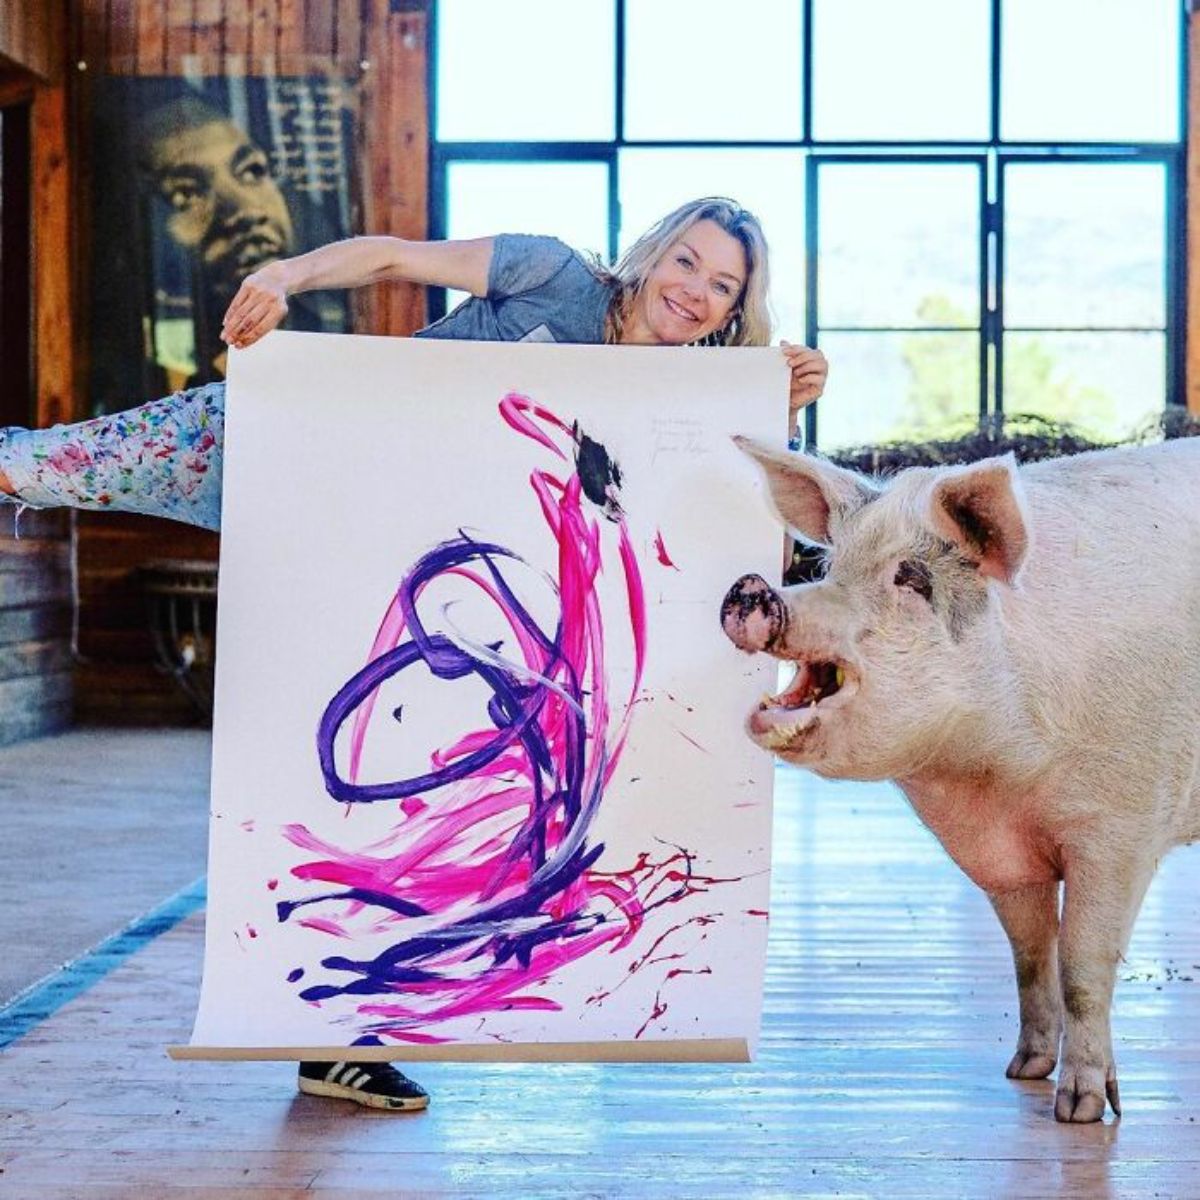 white pig standing next to a woman holding a white canvas with pink and purple paint